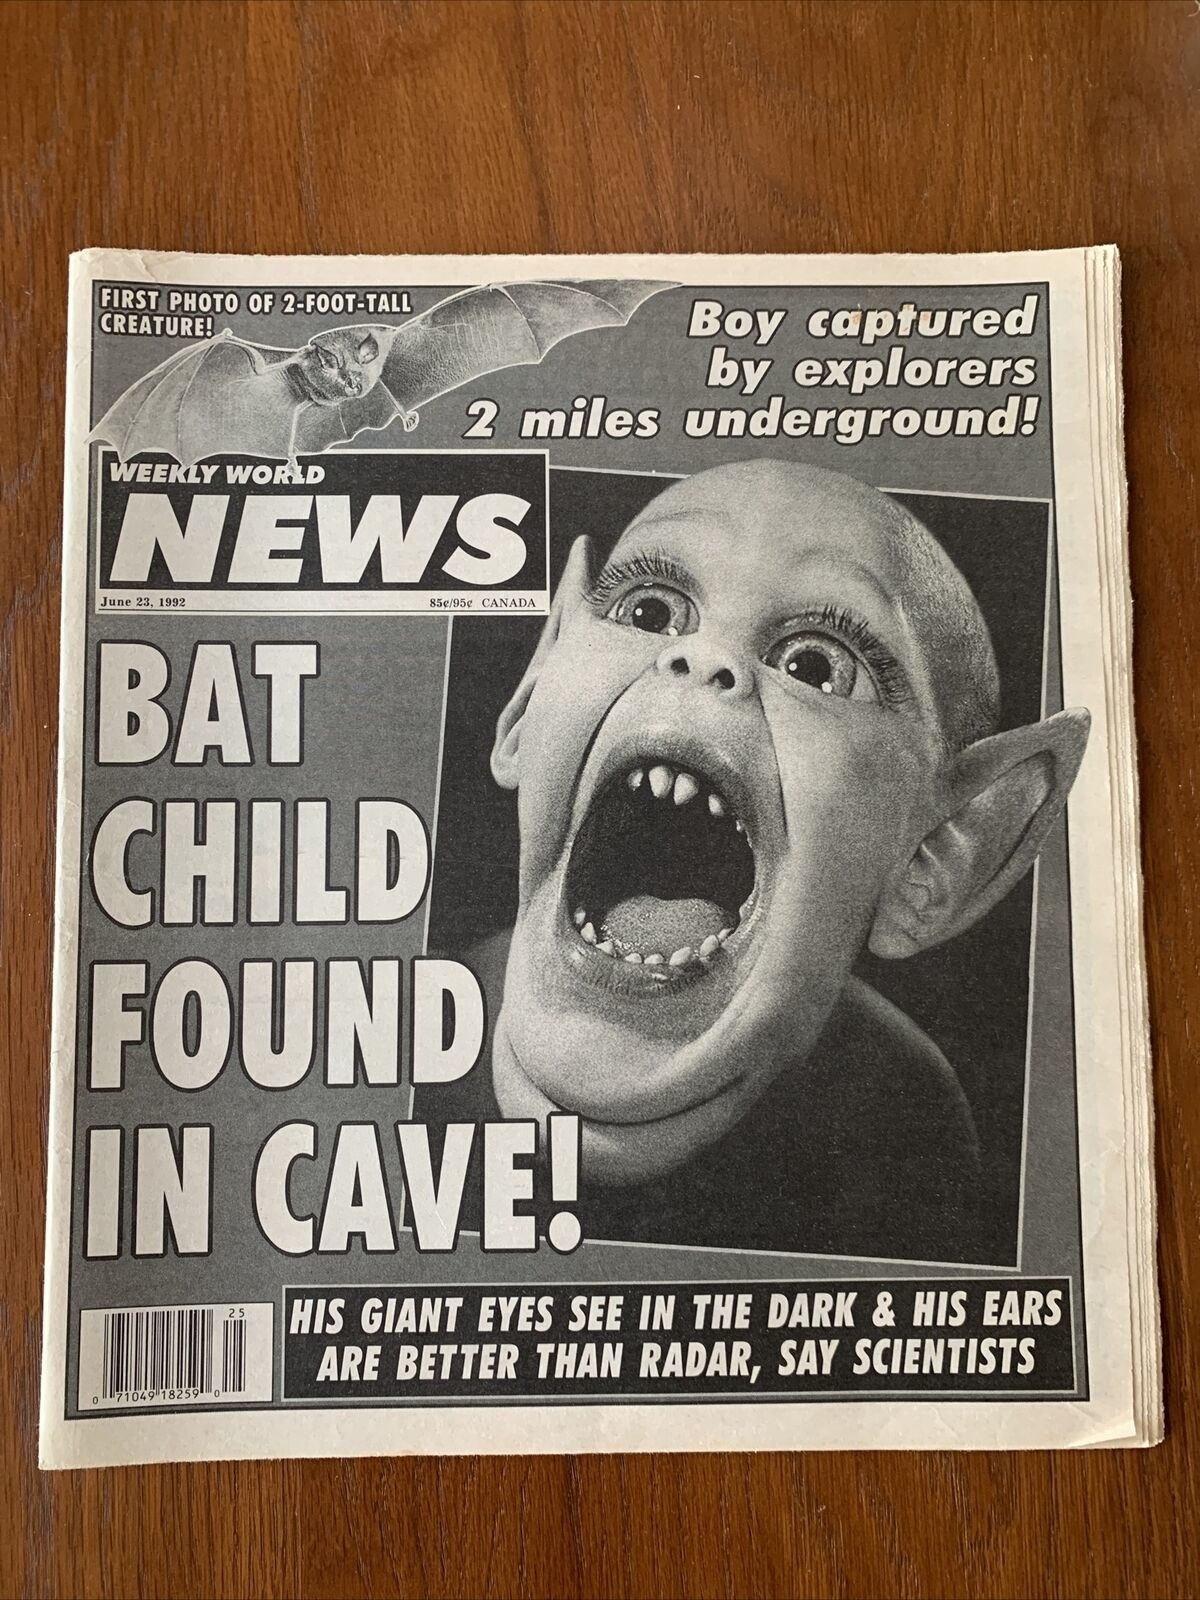 The Weekly World News